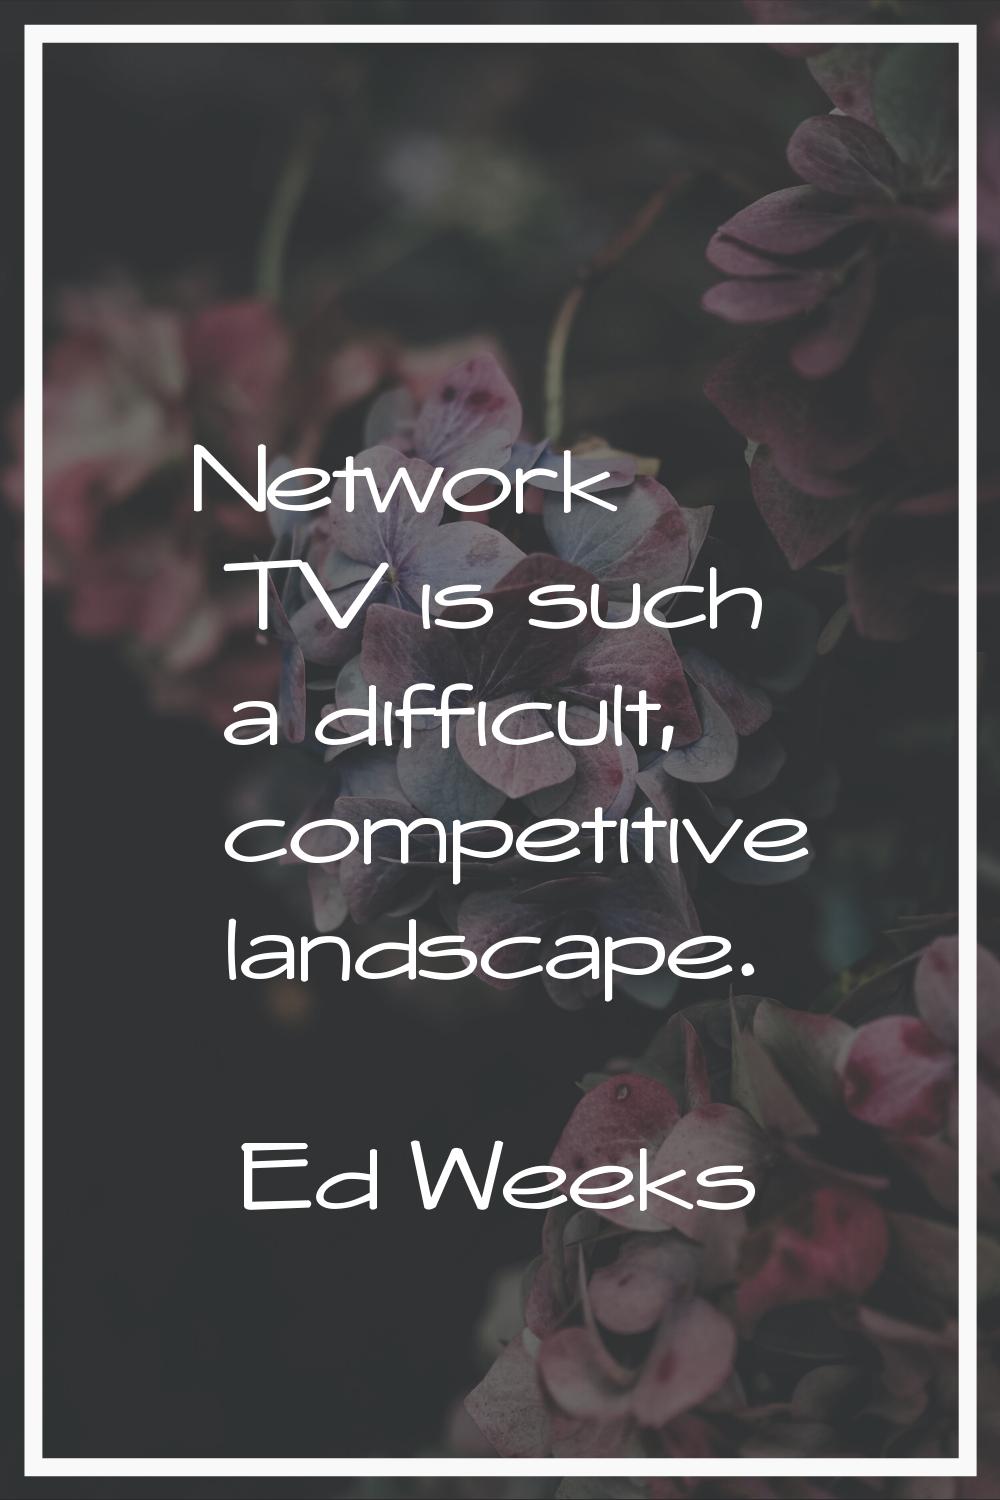 Network TV is such a difficult, competitive landscape.